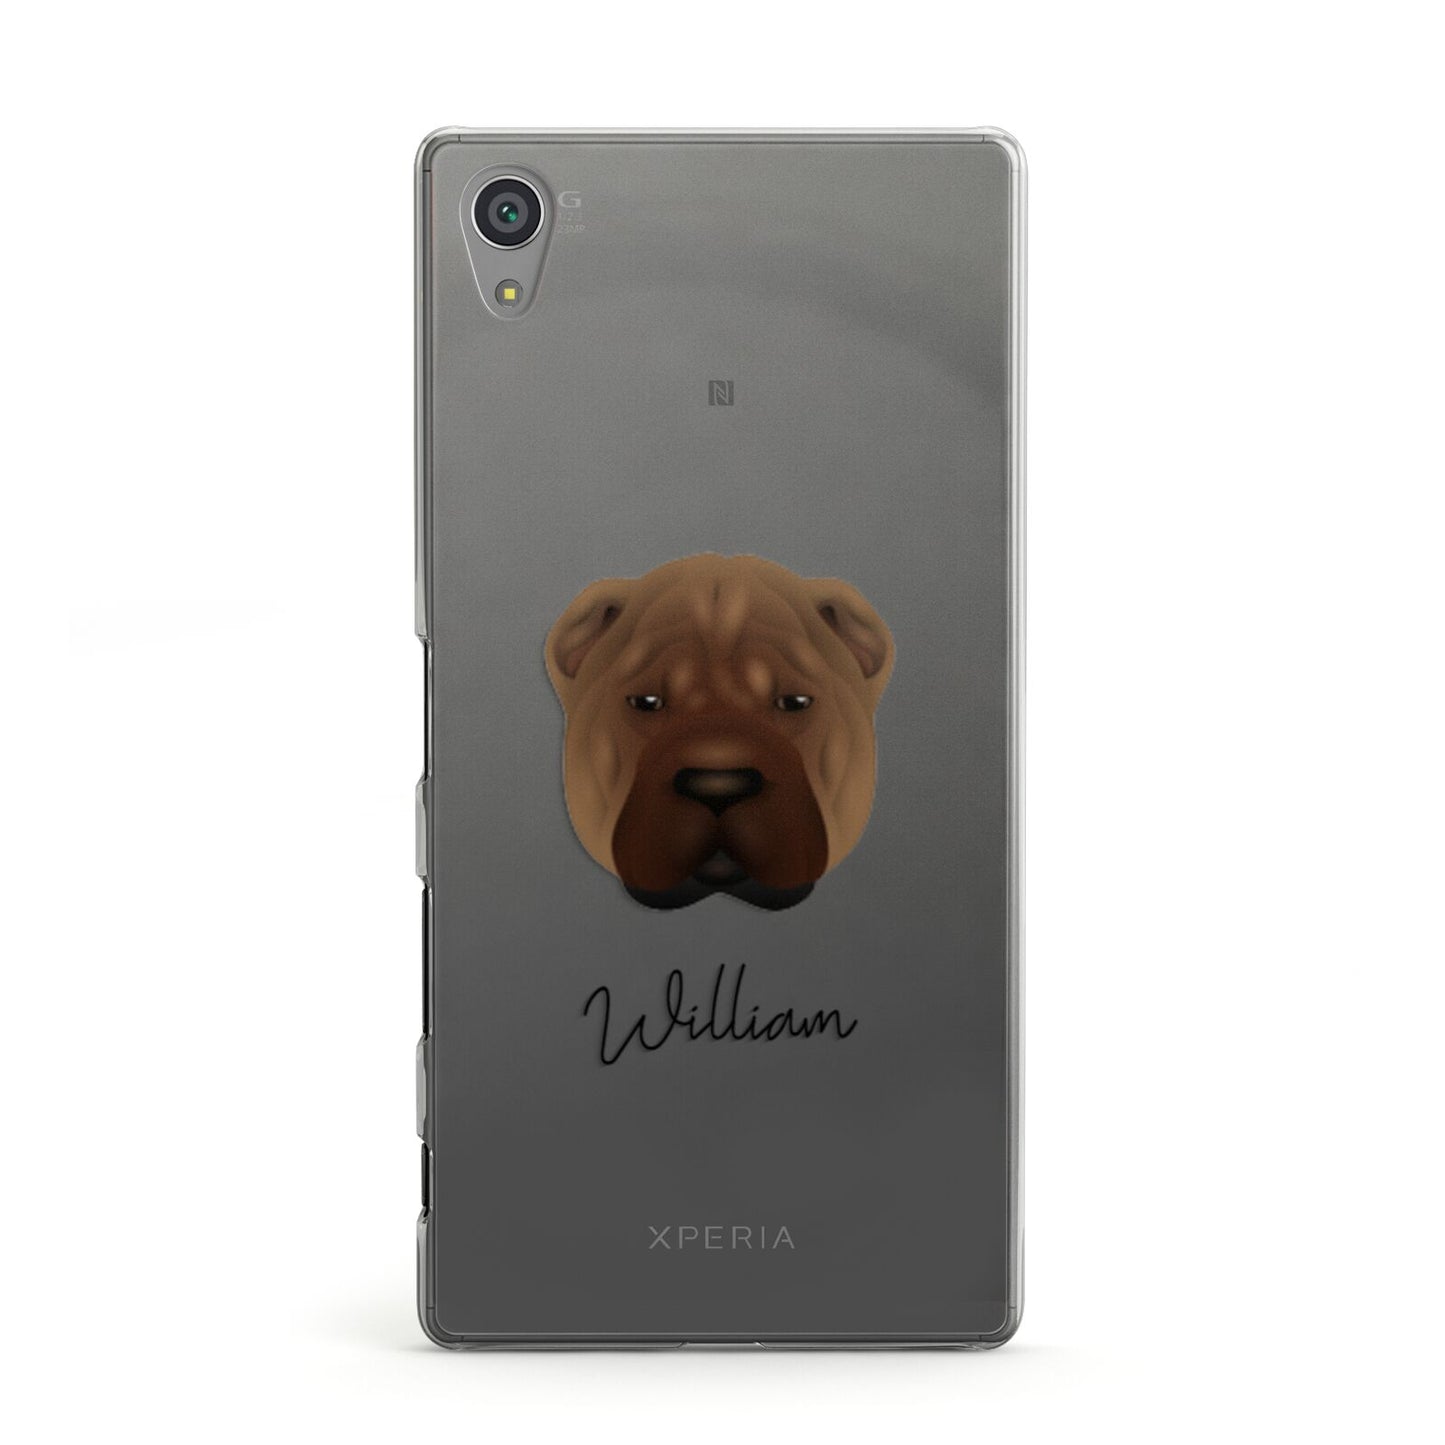 Shar Pei Personalised Sony Xperia Case